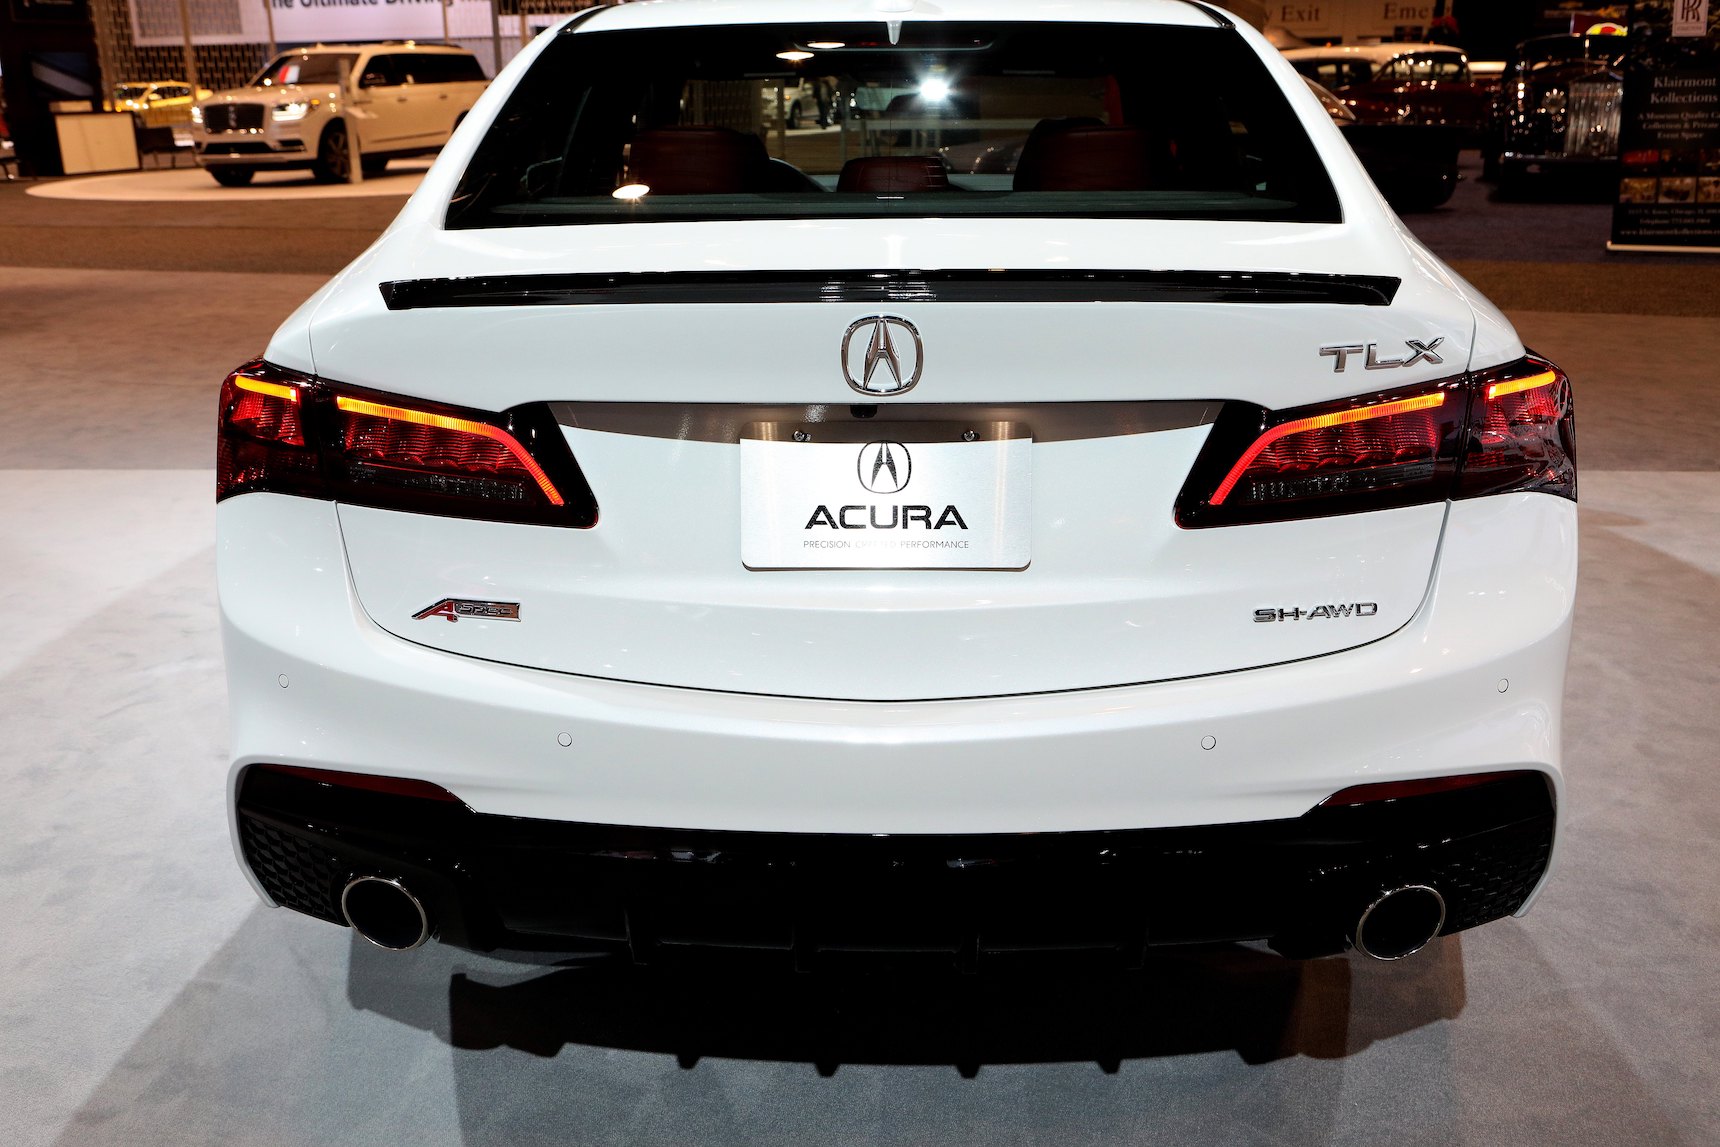 2018 Acura TLX Prototype is on display at the 110th Annual Chicago Auto Show